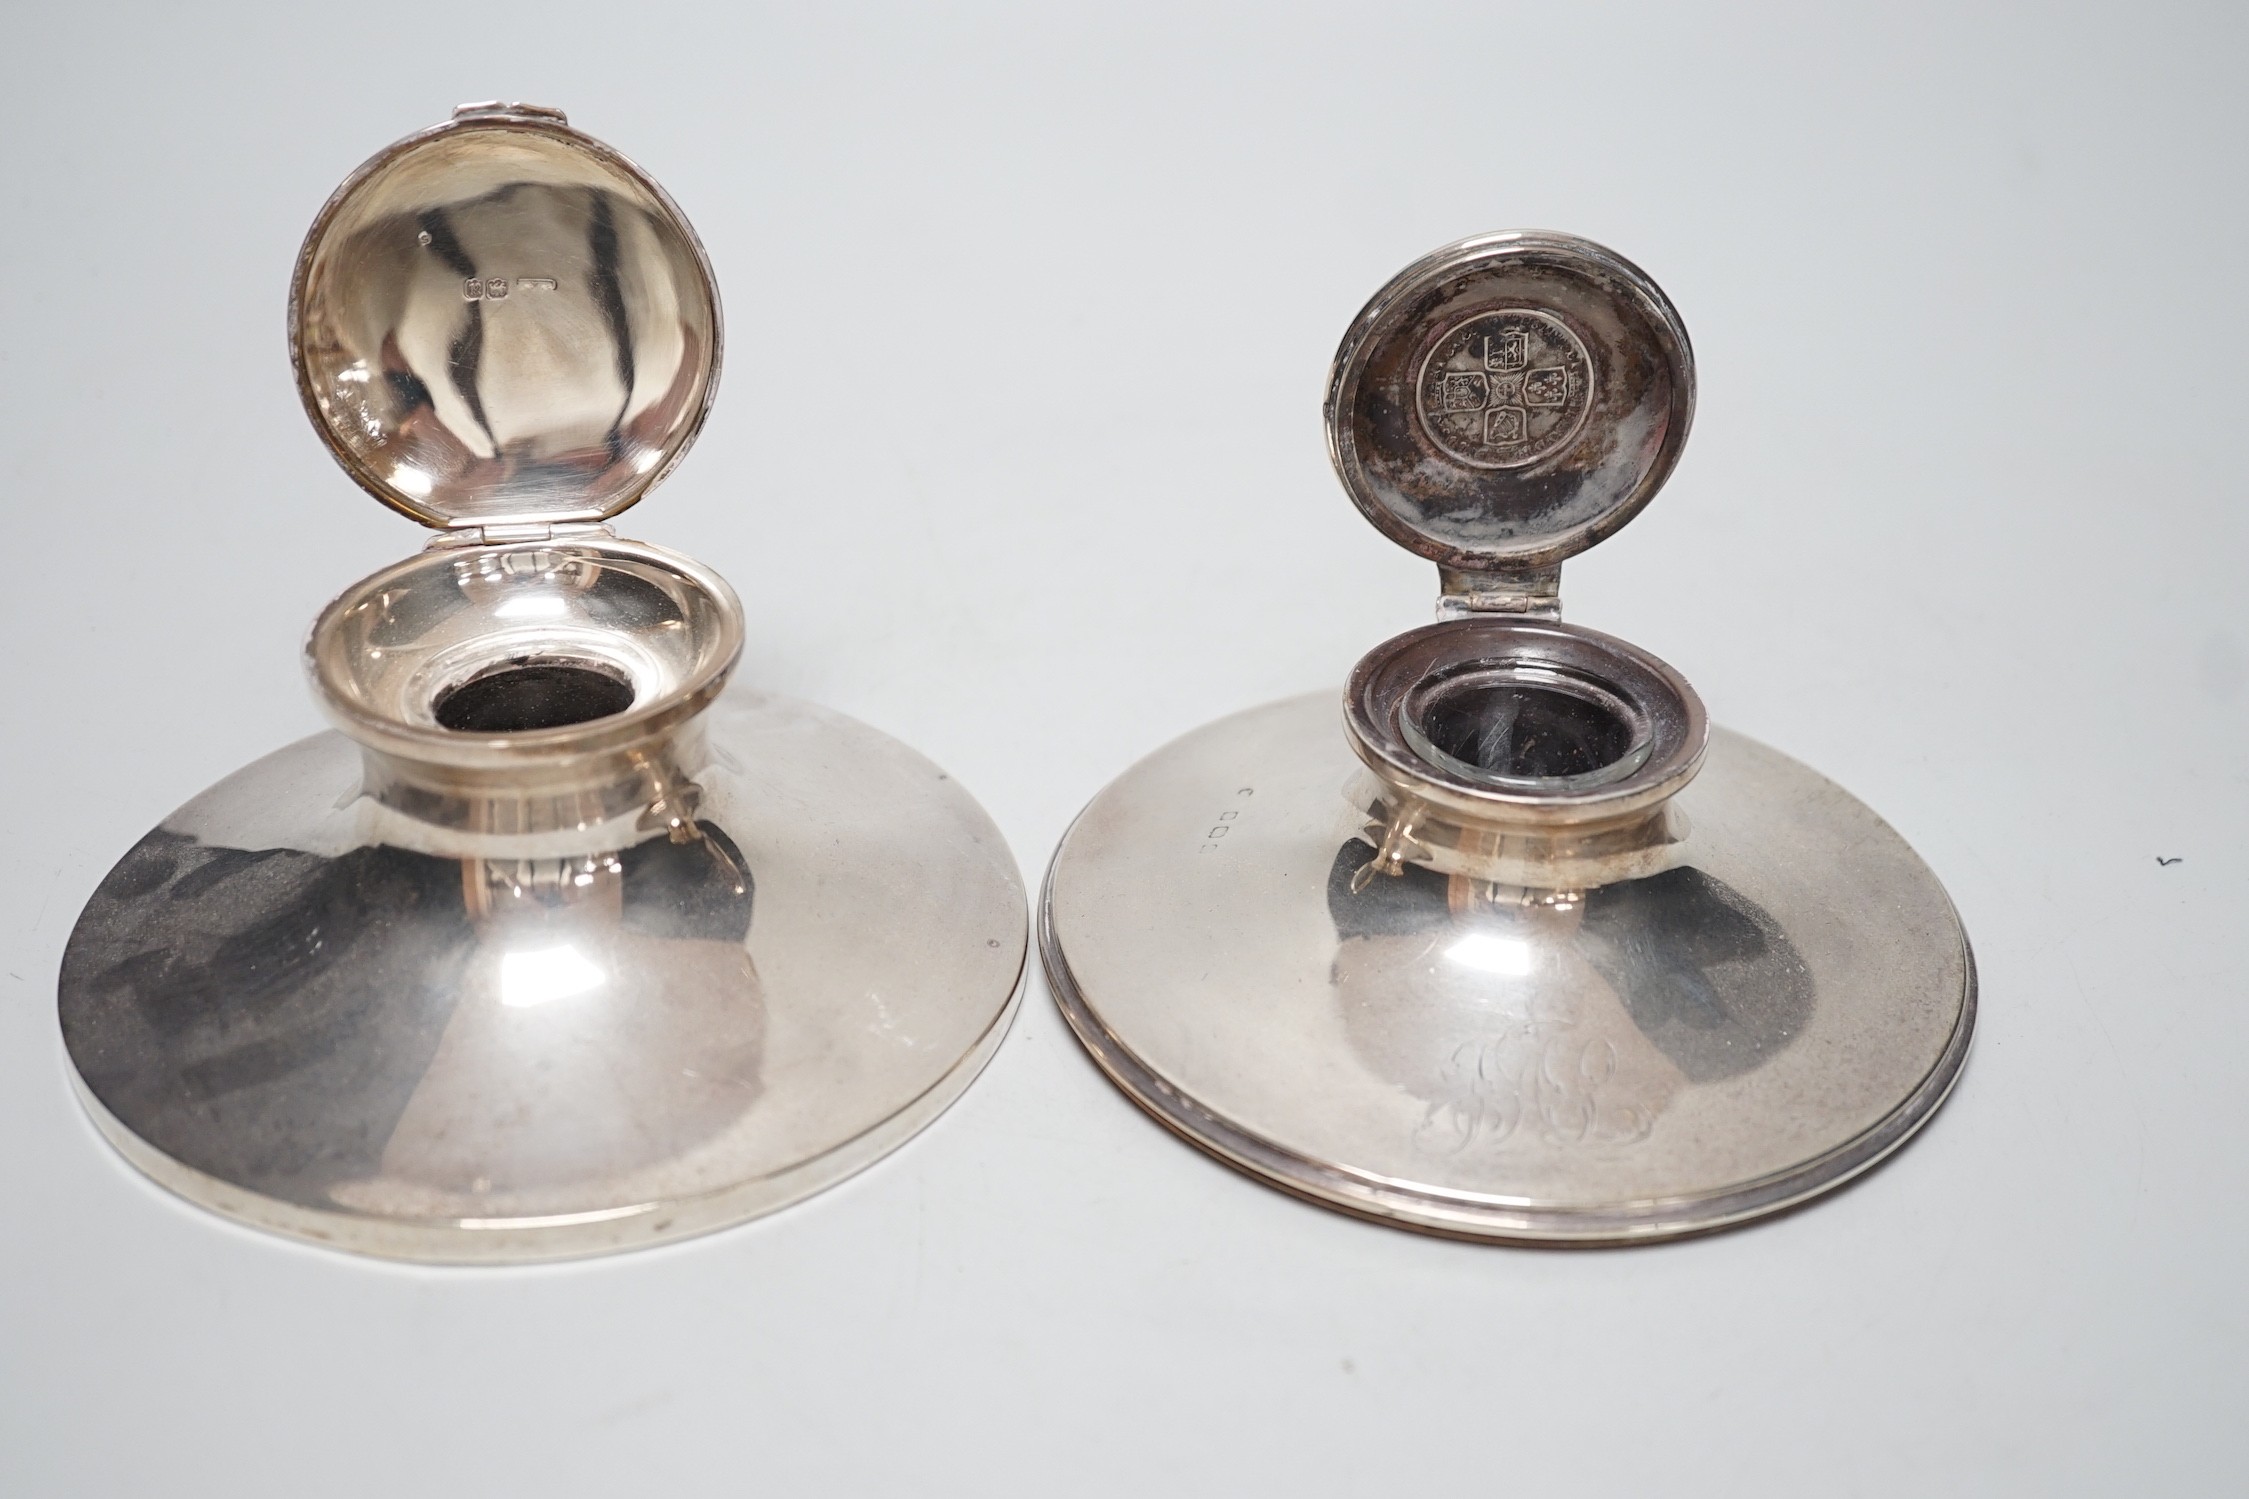 A George V silver mounted capstan inkwell, by Mappin & Webb, London, 1916, diameter 13.6cm and one other silver mounted capstan inkwell.